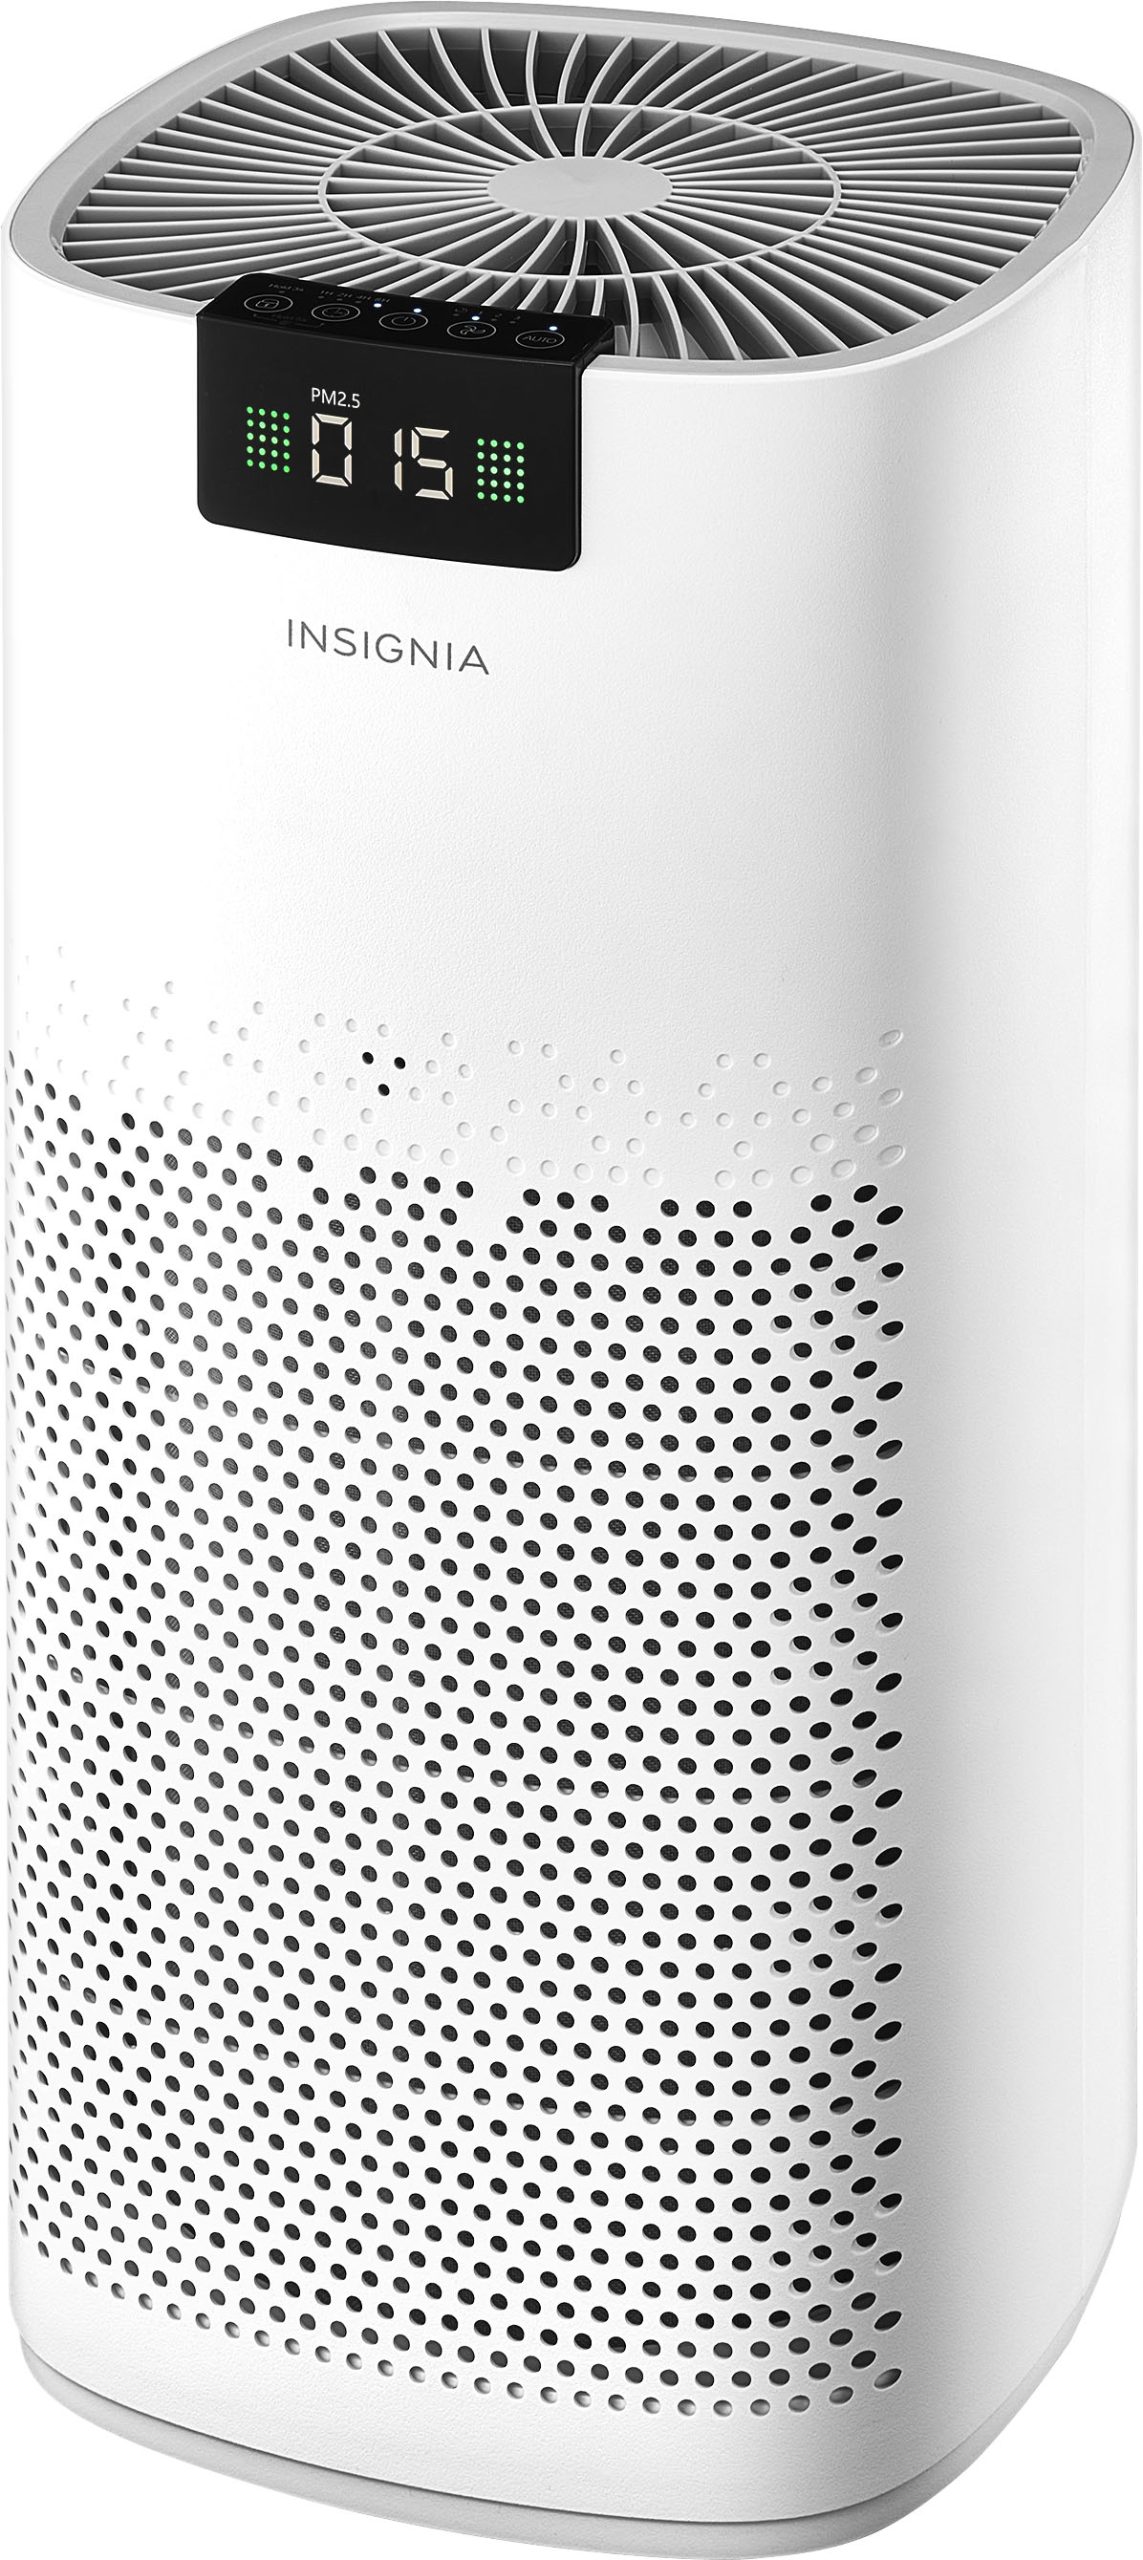 Insignia™ – 375 Sq. Ft. HEPA Air Purifier – White – Just $129.99 at Best Buy